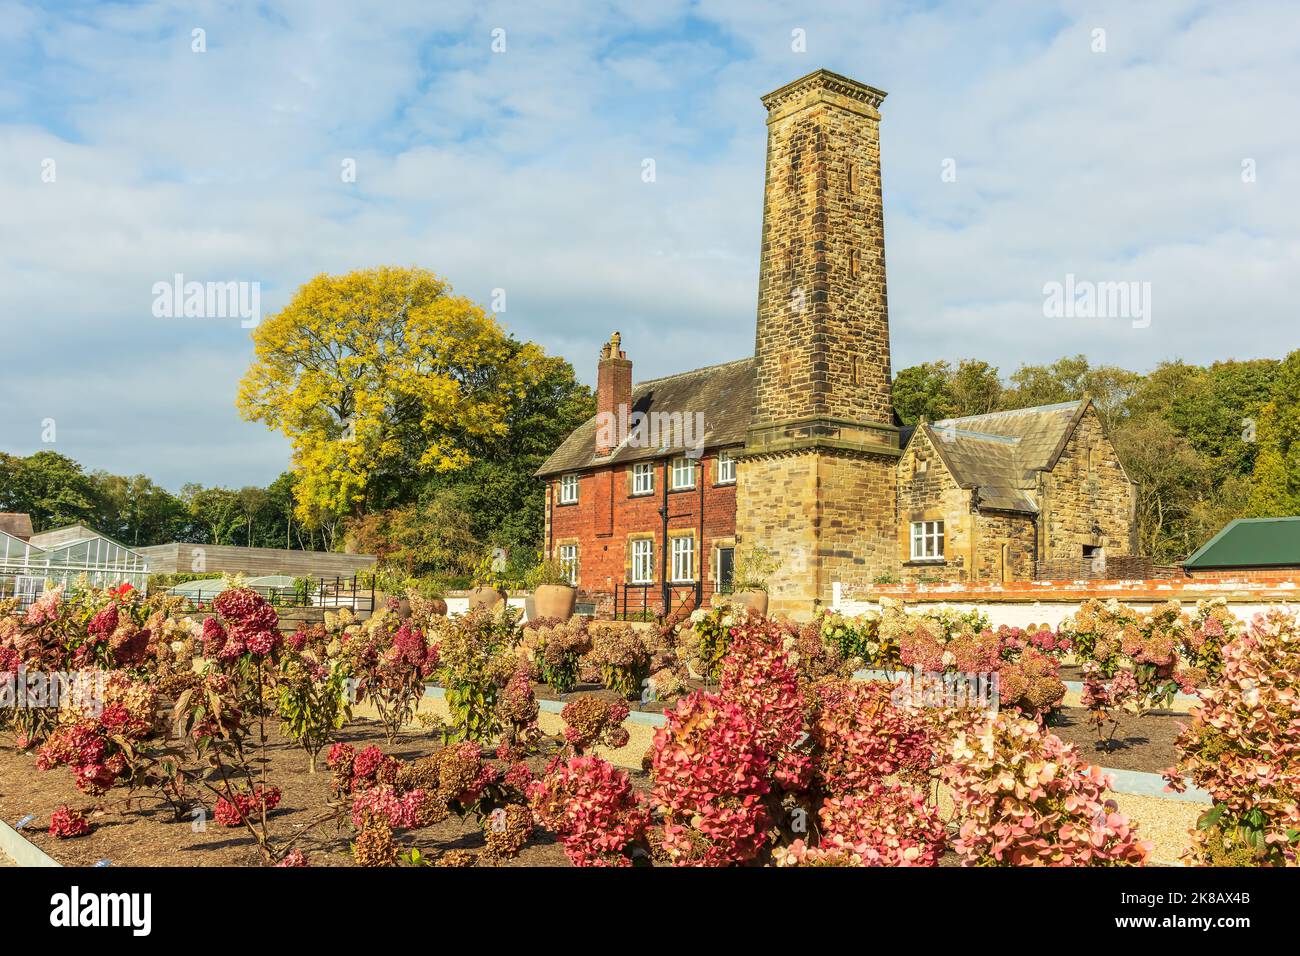 Small shrubs of hydrangea in autumnal colour planted in front of an old brick building with tall tower The Bothy at the RHS Bridgewater gardens, UK. Stock Photo